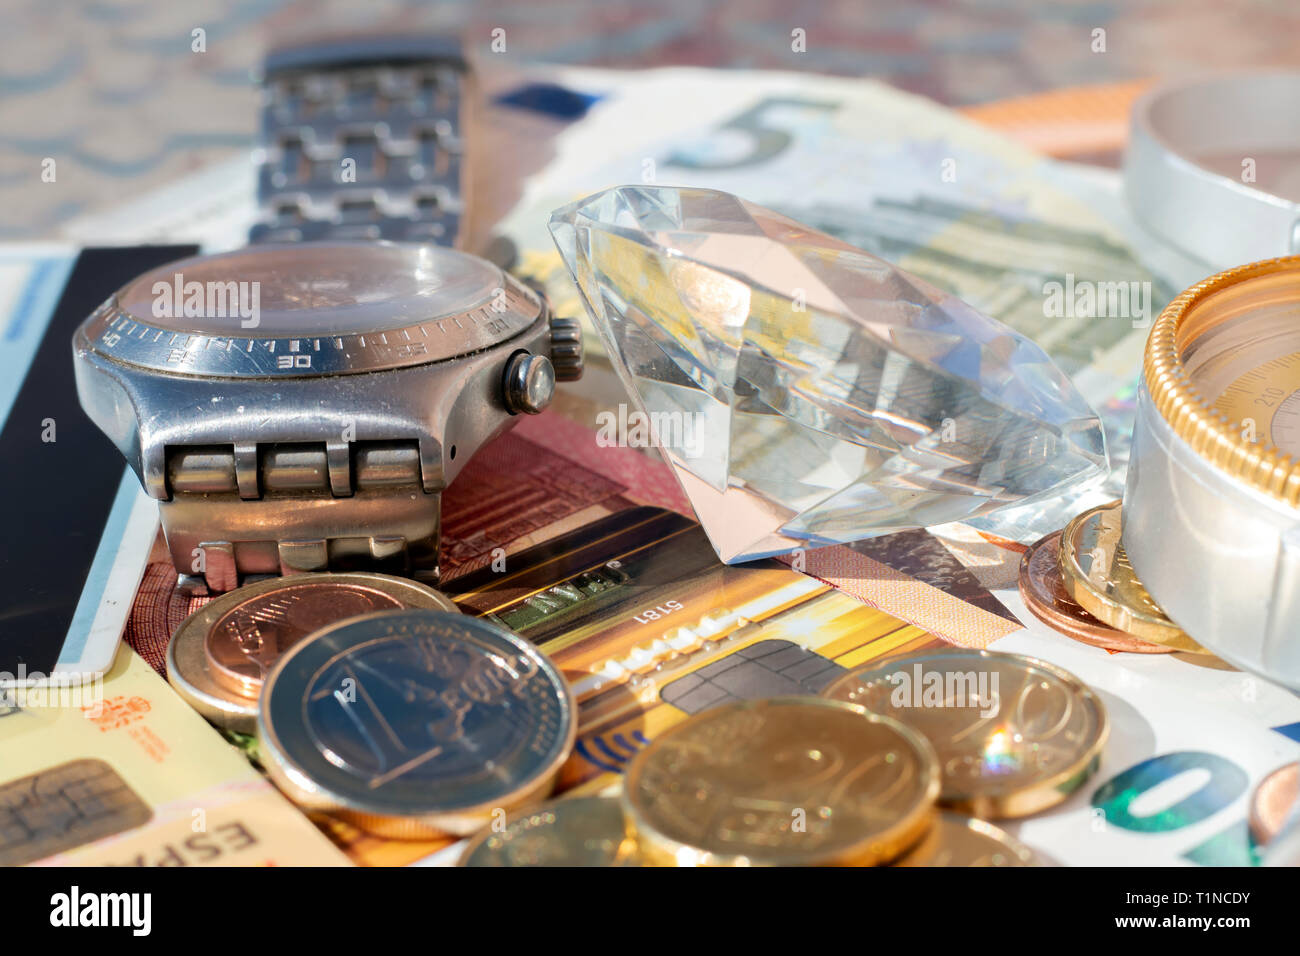 Signs of wealth: Euro banknotes, coins, credit card, jewelry, diamonds Stock Photo